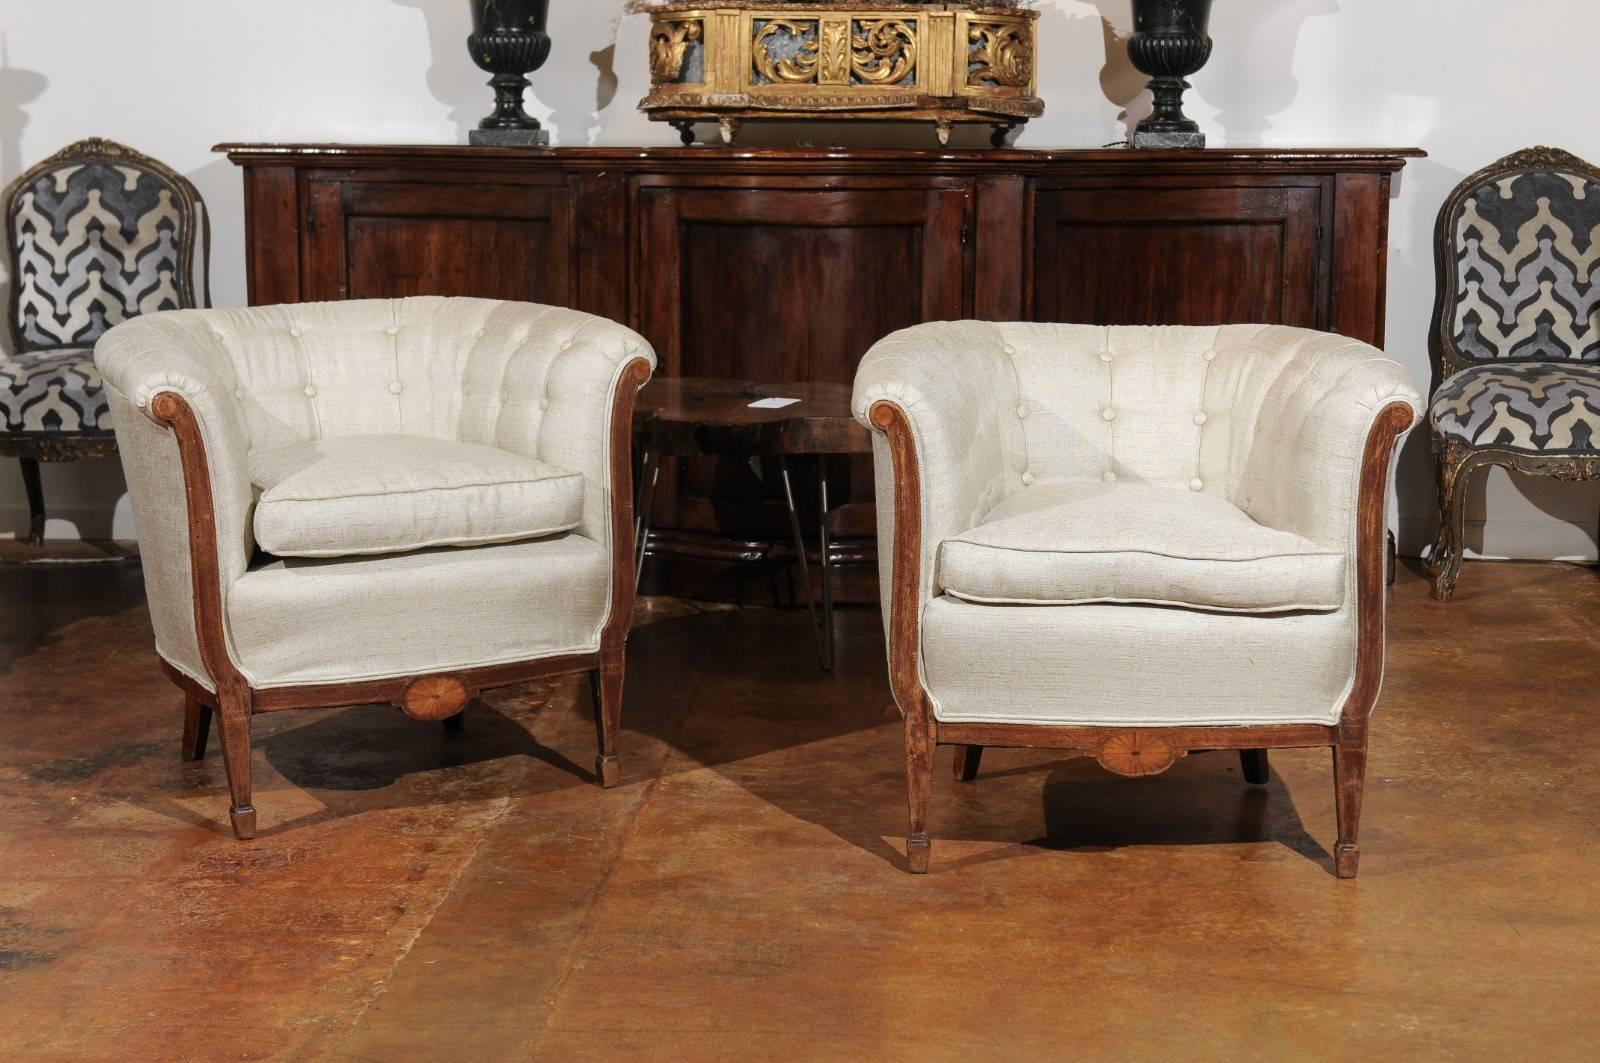 A pair of French wooden club chairs from the 19th century with carved skirt, out-scrolled arms, banded inlay and new upholstery. Each of this pair of French club chairs features a wraparound back, flowing seamlessly into the delicately out-scrolled